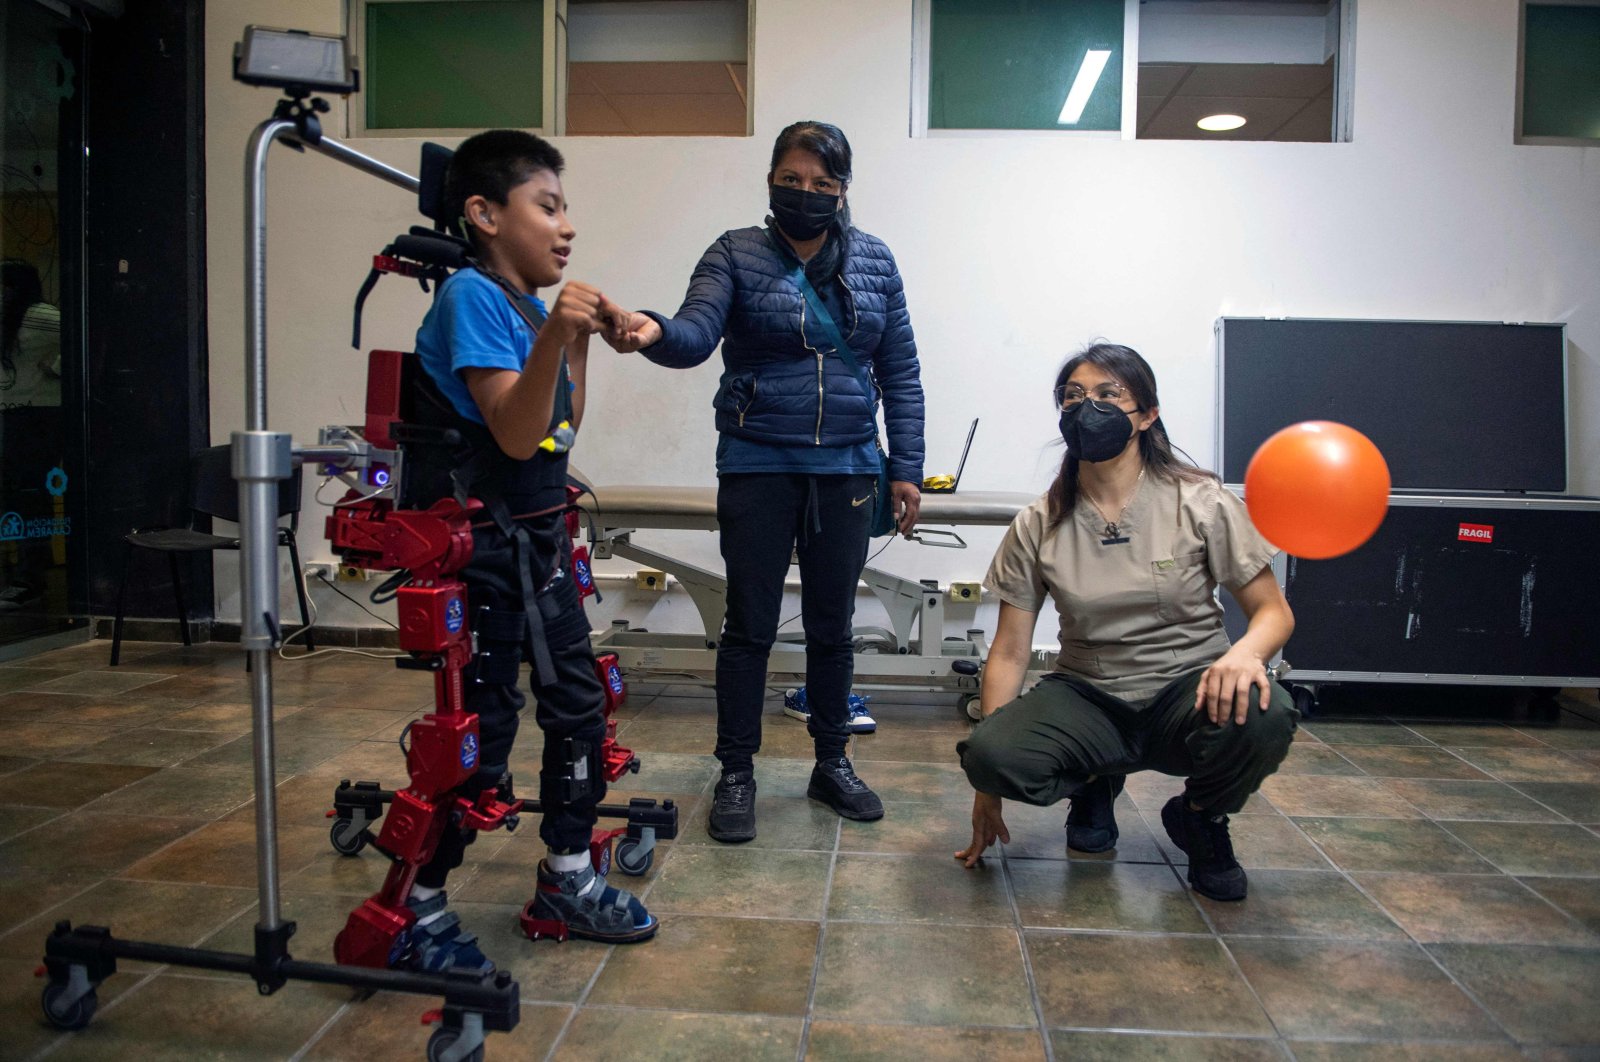 David Zabala is assisted by a physical therapist and his mother, during a rehabilitation session, at the Association for People with Cerebral Palsy in Mexico City, Mexico, Oct. 18, 2022. (AFP Photo)